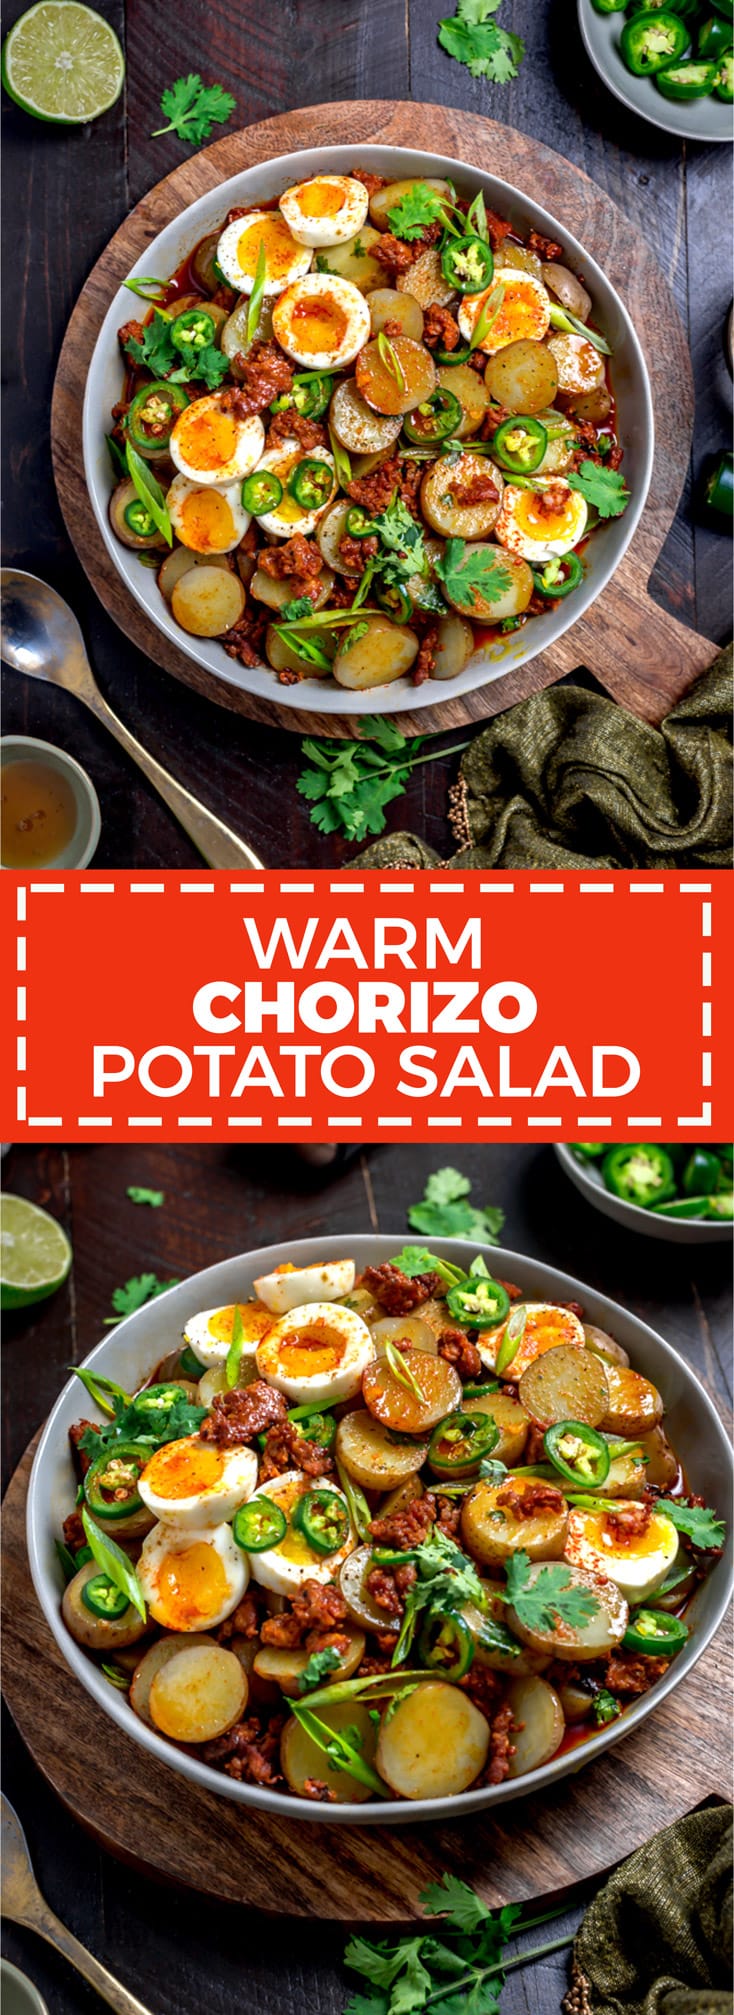 With a whisper of smoke and spice, Warm Chorizo Potato Salad is a Mexican-inspired spin on the German classic. Served with soft-boiled eggs and a chorizo vinaigrette, this mayo-free mash-up is best served warm.  | hostthetoast.com